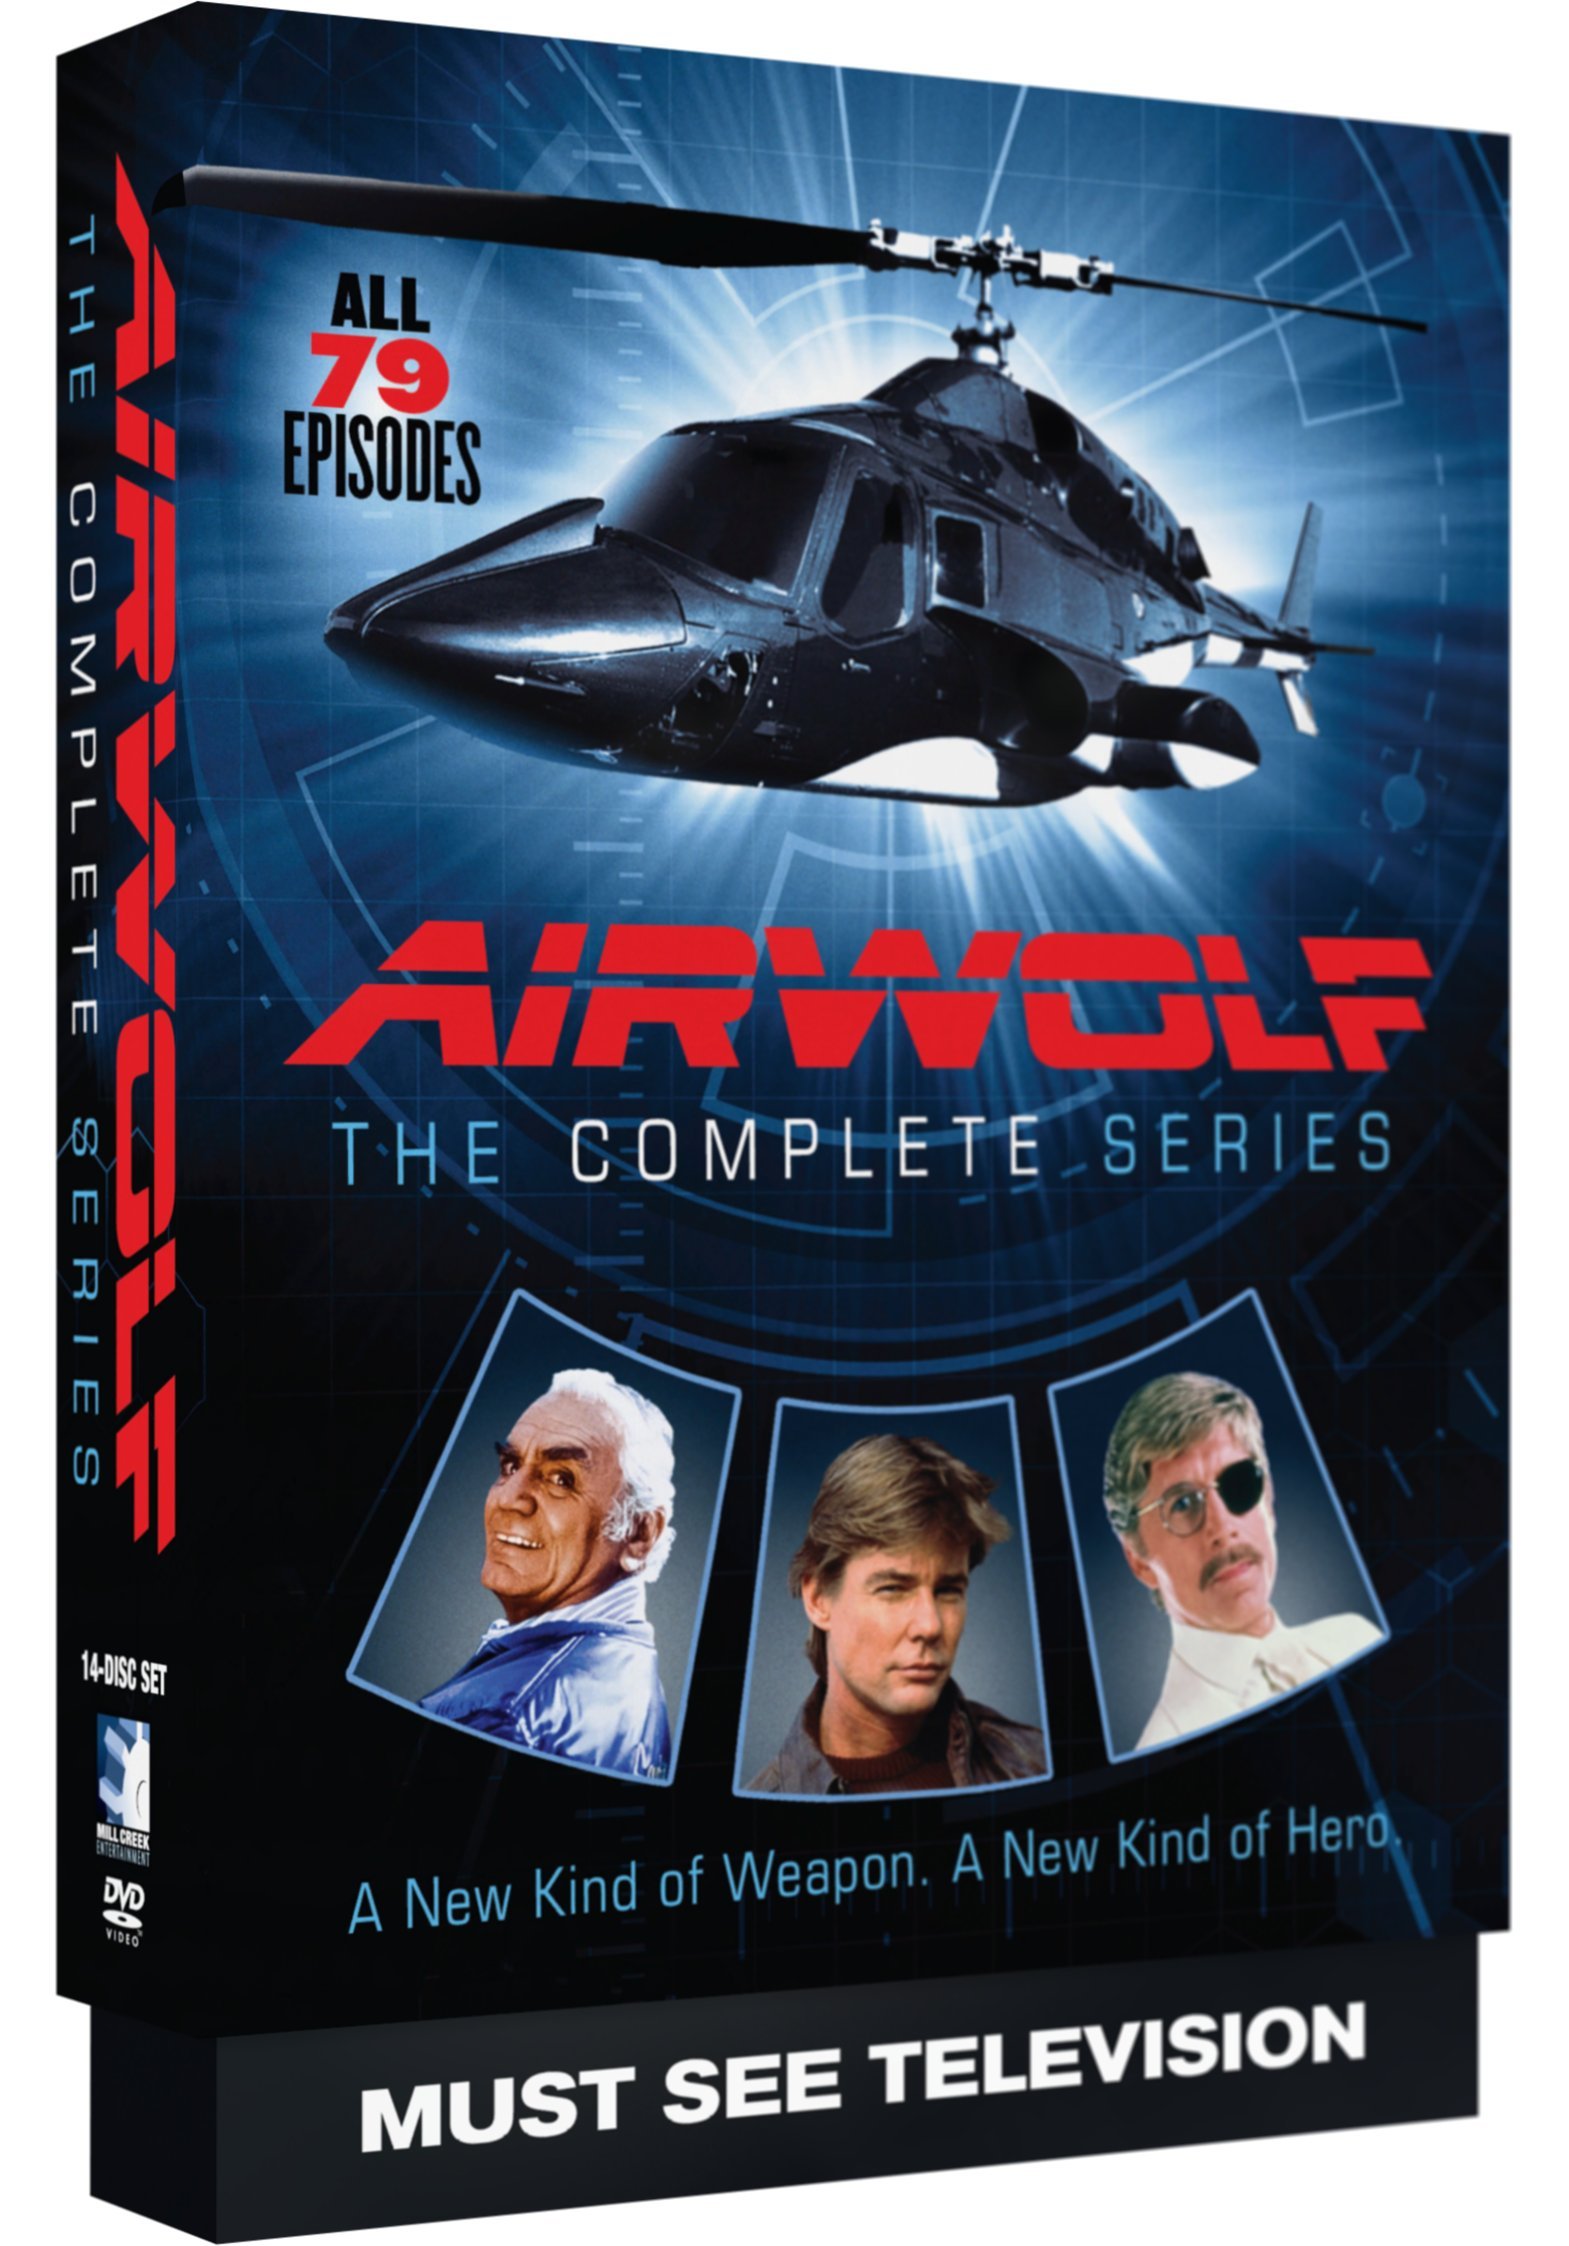 Airwolf – The Complete Series